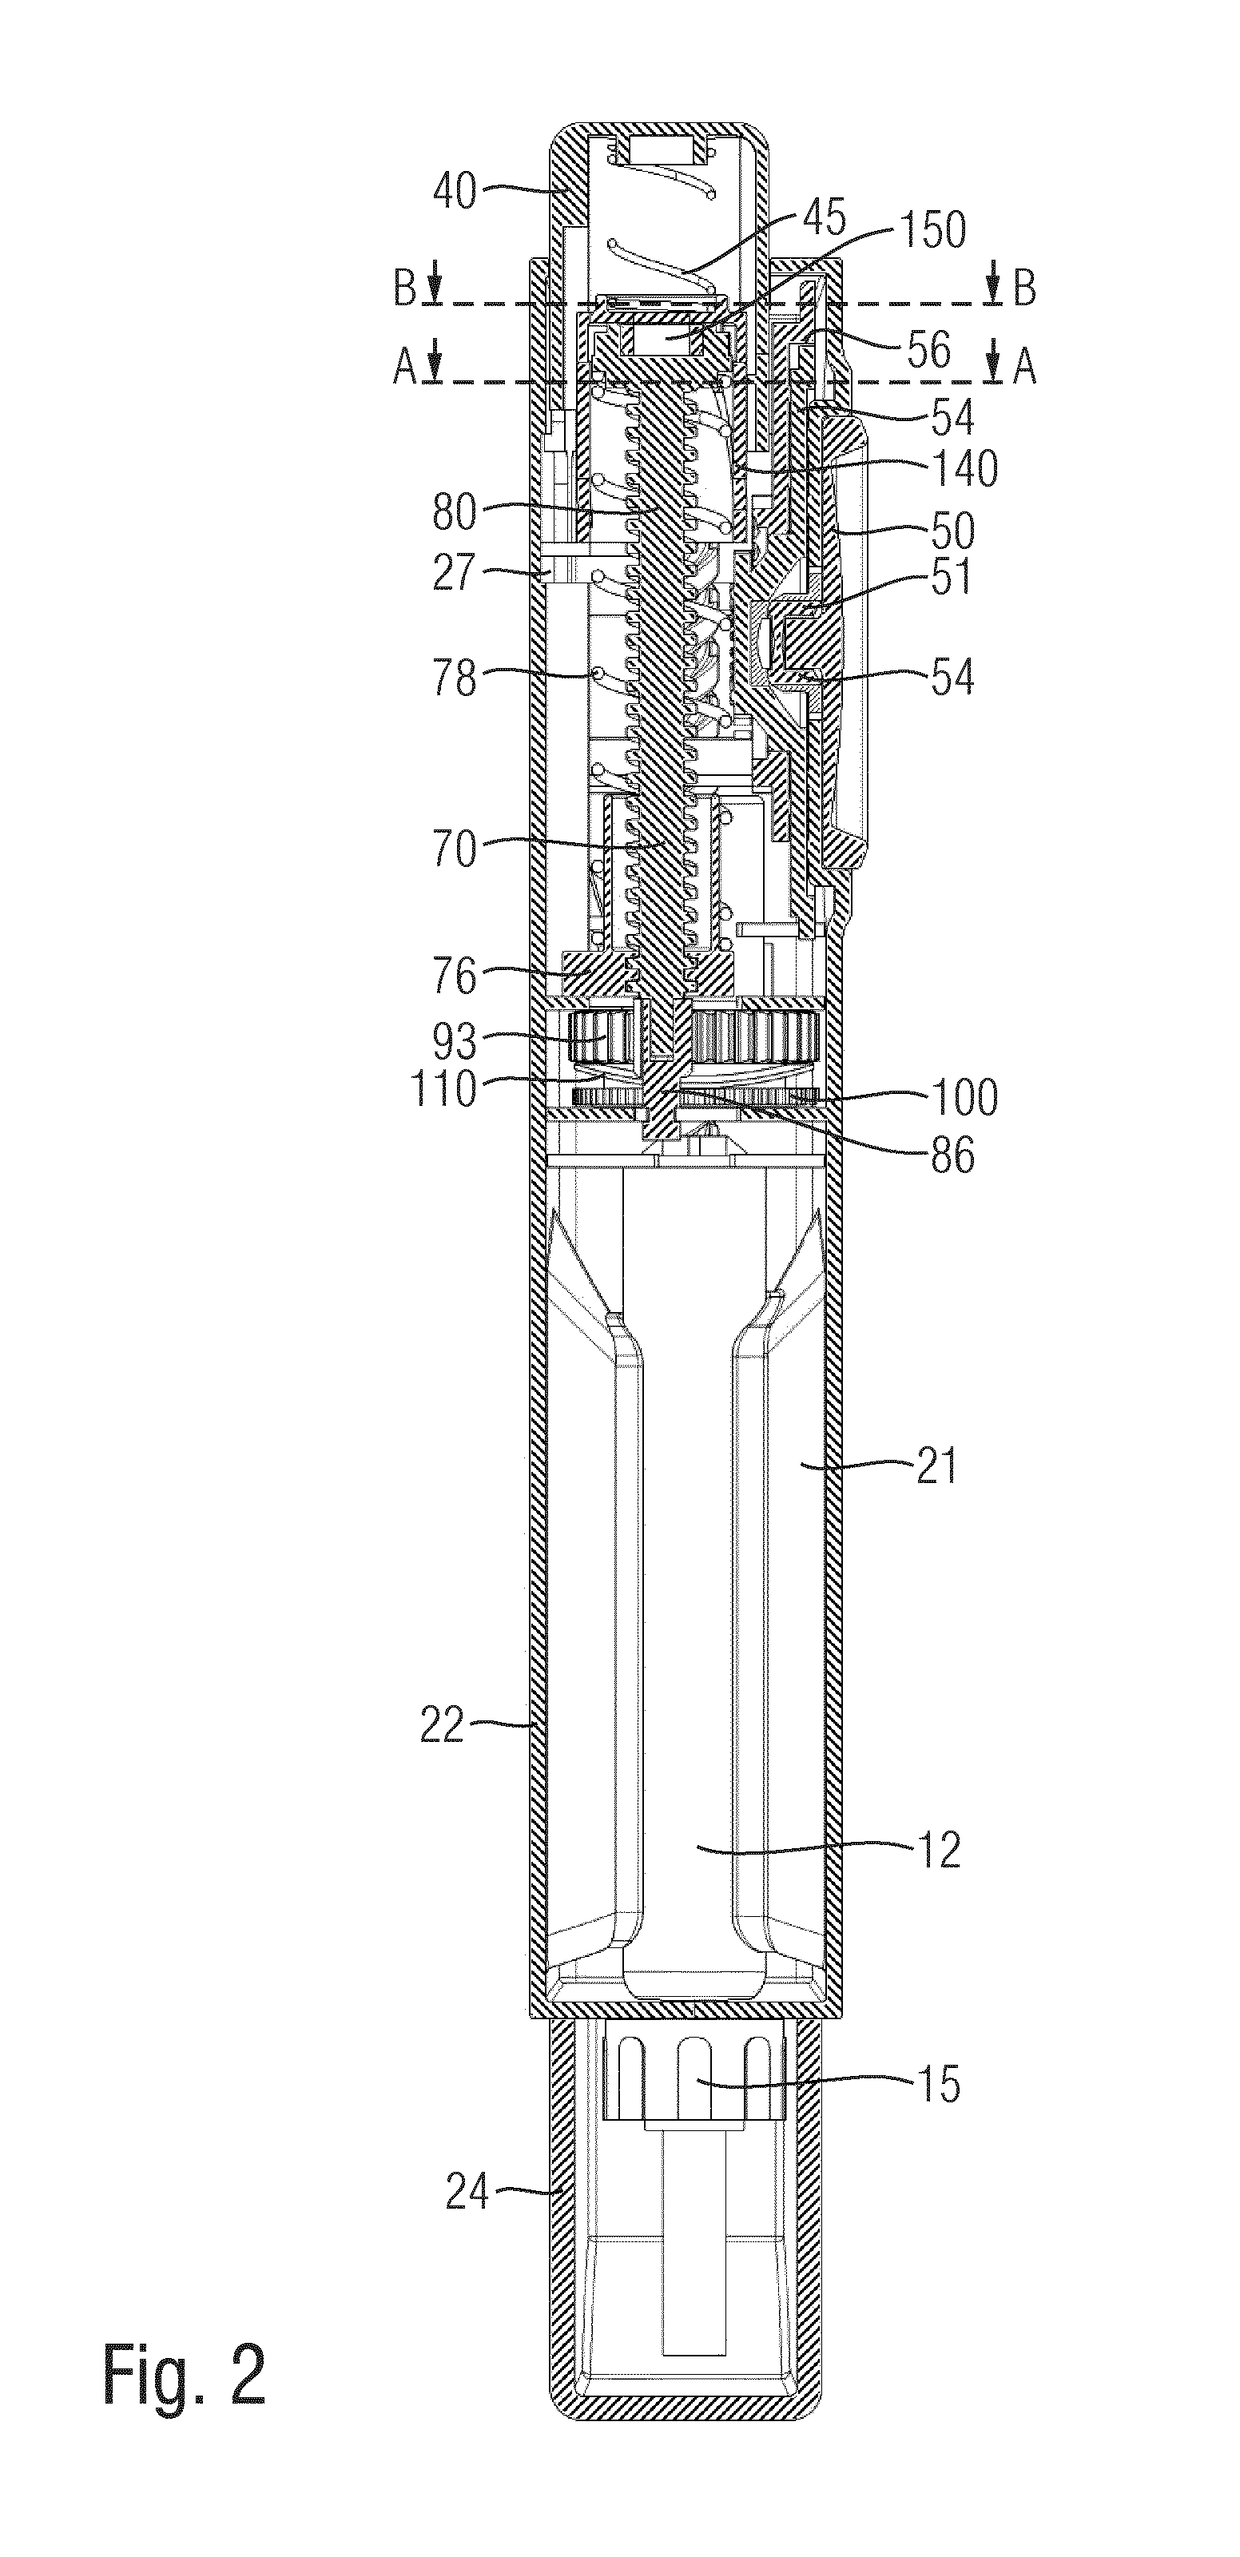 Hand-held drug injection device and dose setting limiter mechanism therefor